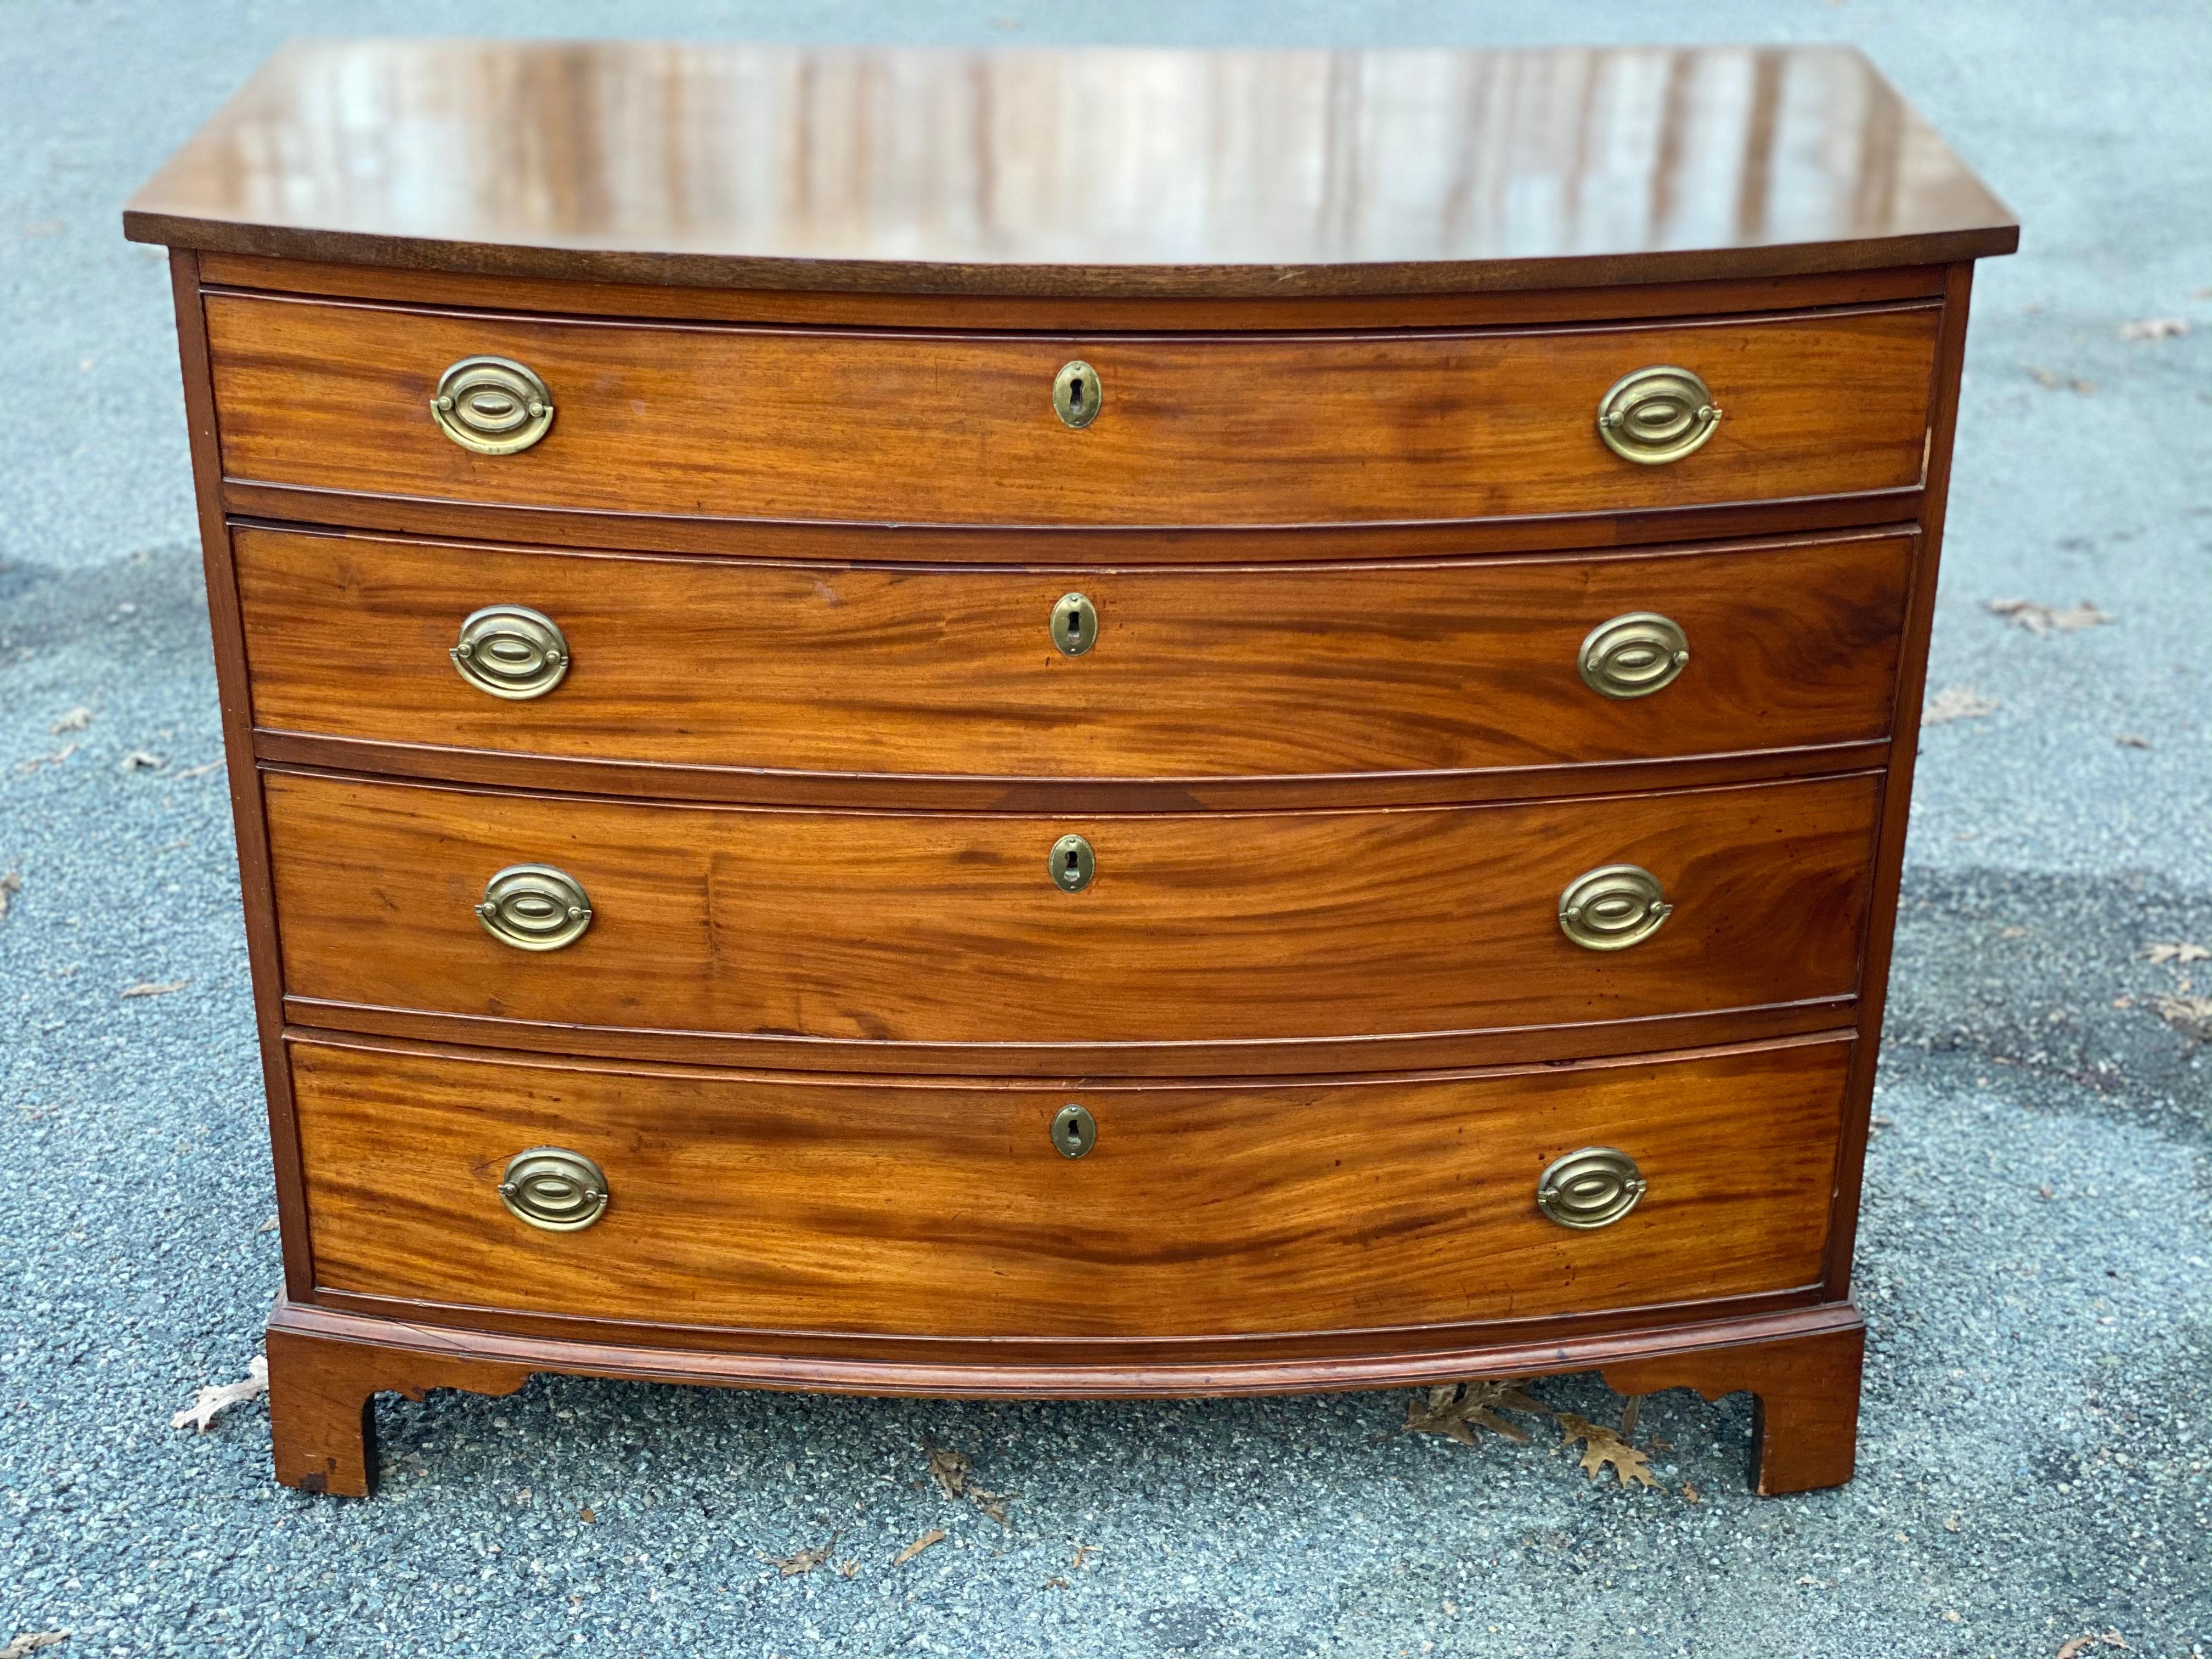 Very good 19th century English 4-drawer bowfront chest of drawers with figured mahogany on bracket feet. Very good color and patina.